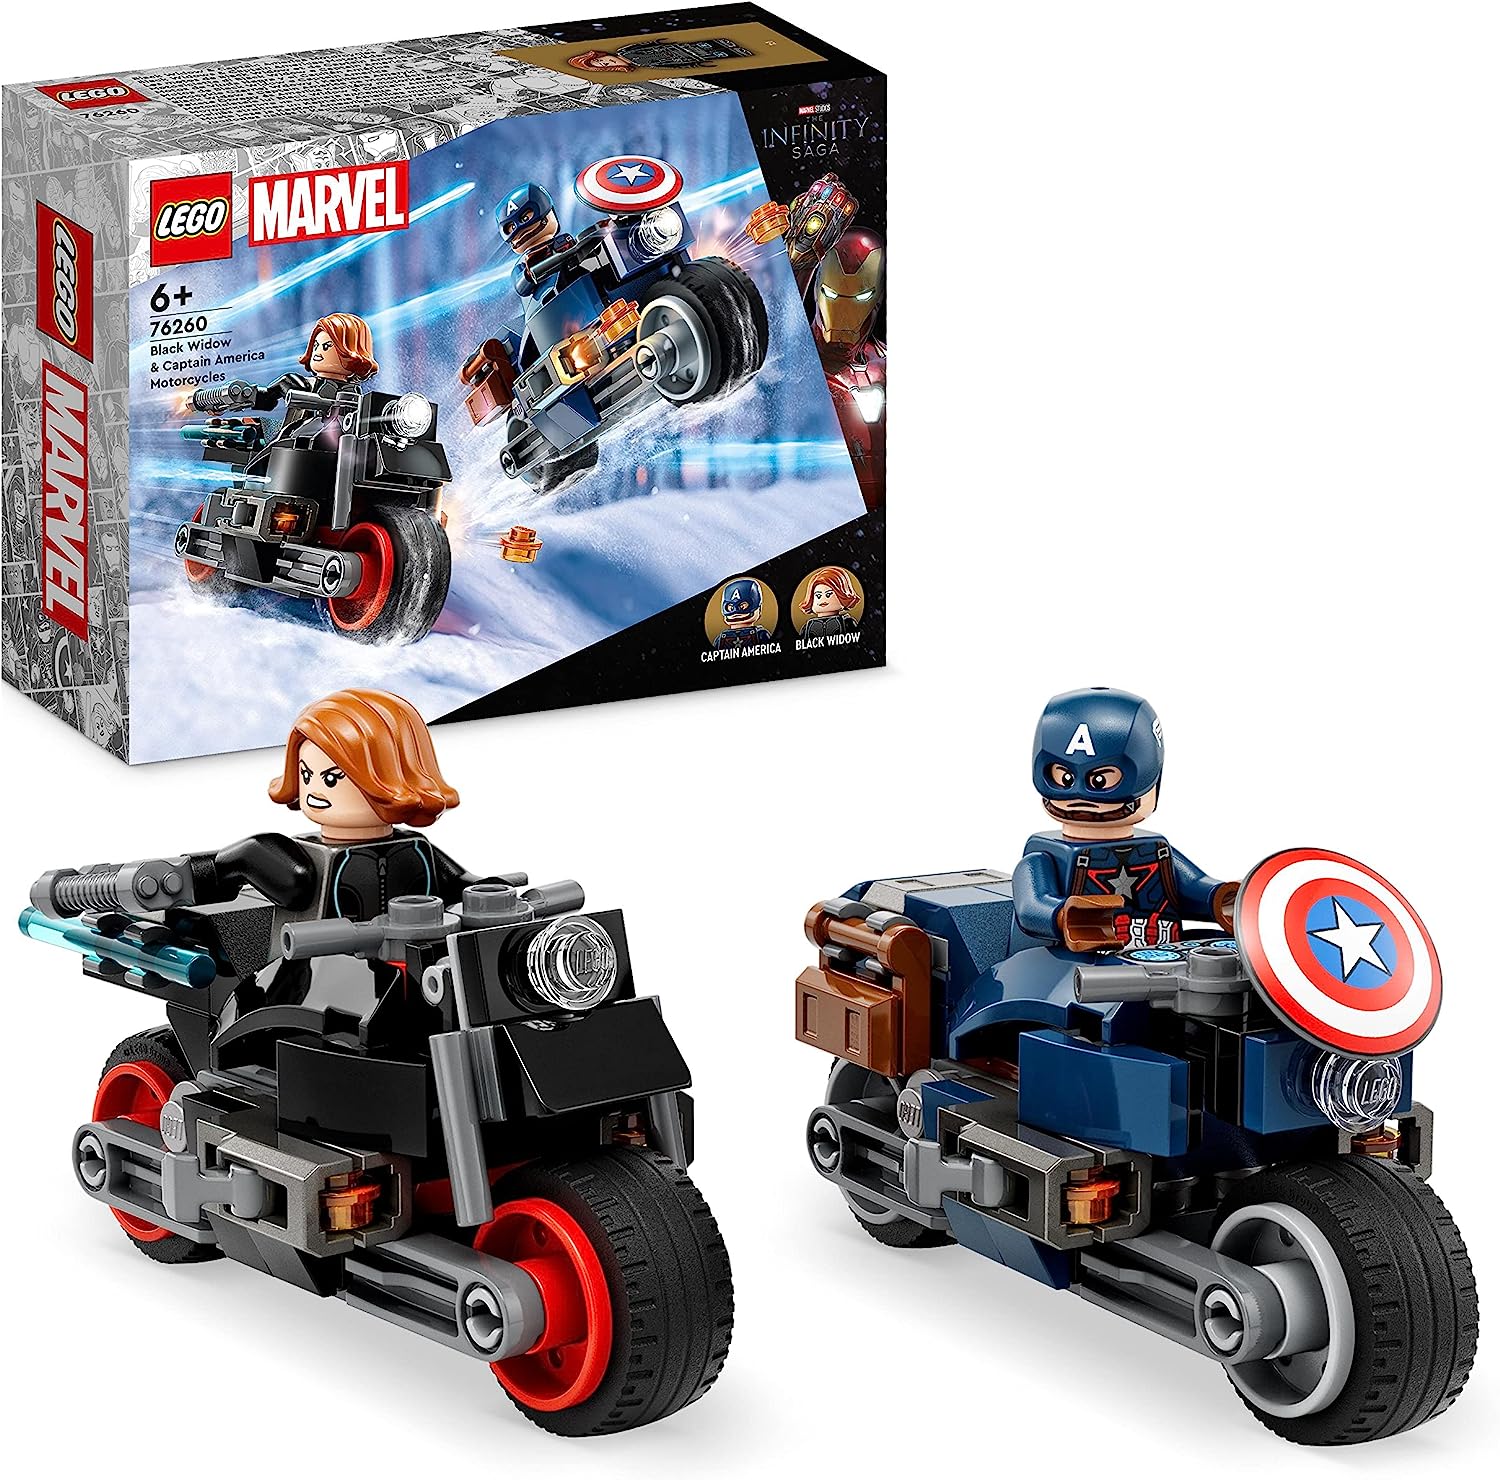 LEGO 76260 Marvel Captain America & Black Widow Motorcycles, Avengers: Age of Ultron Set, Motorcycle Toy for Children to Build and Collect with Figures, Gift for Boys and Girls From 6 Years